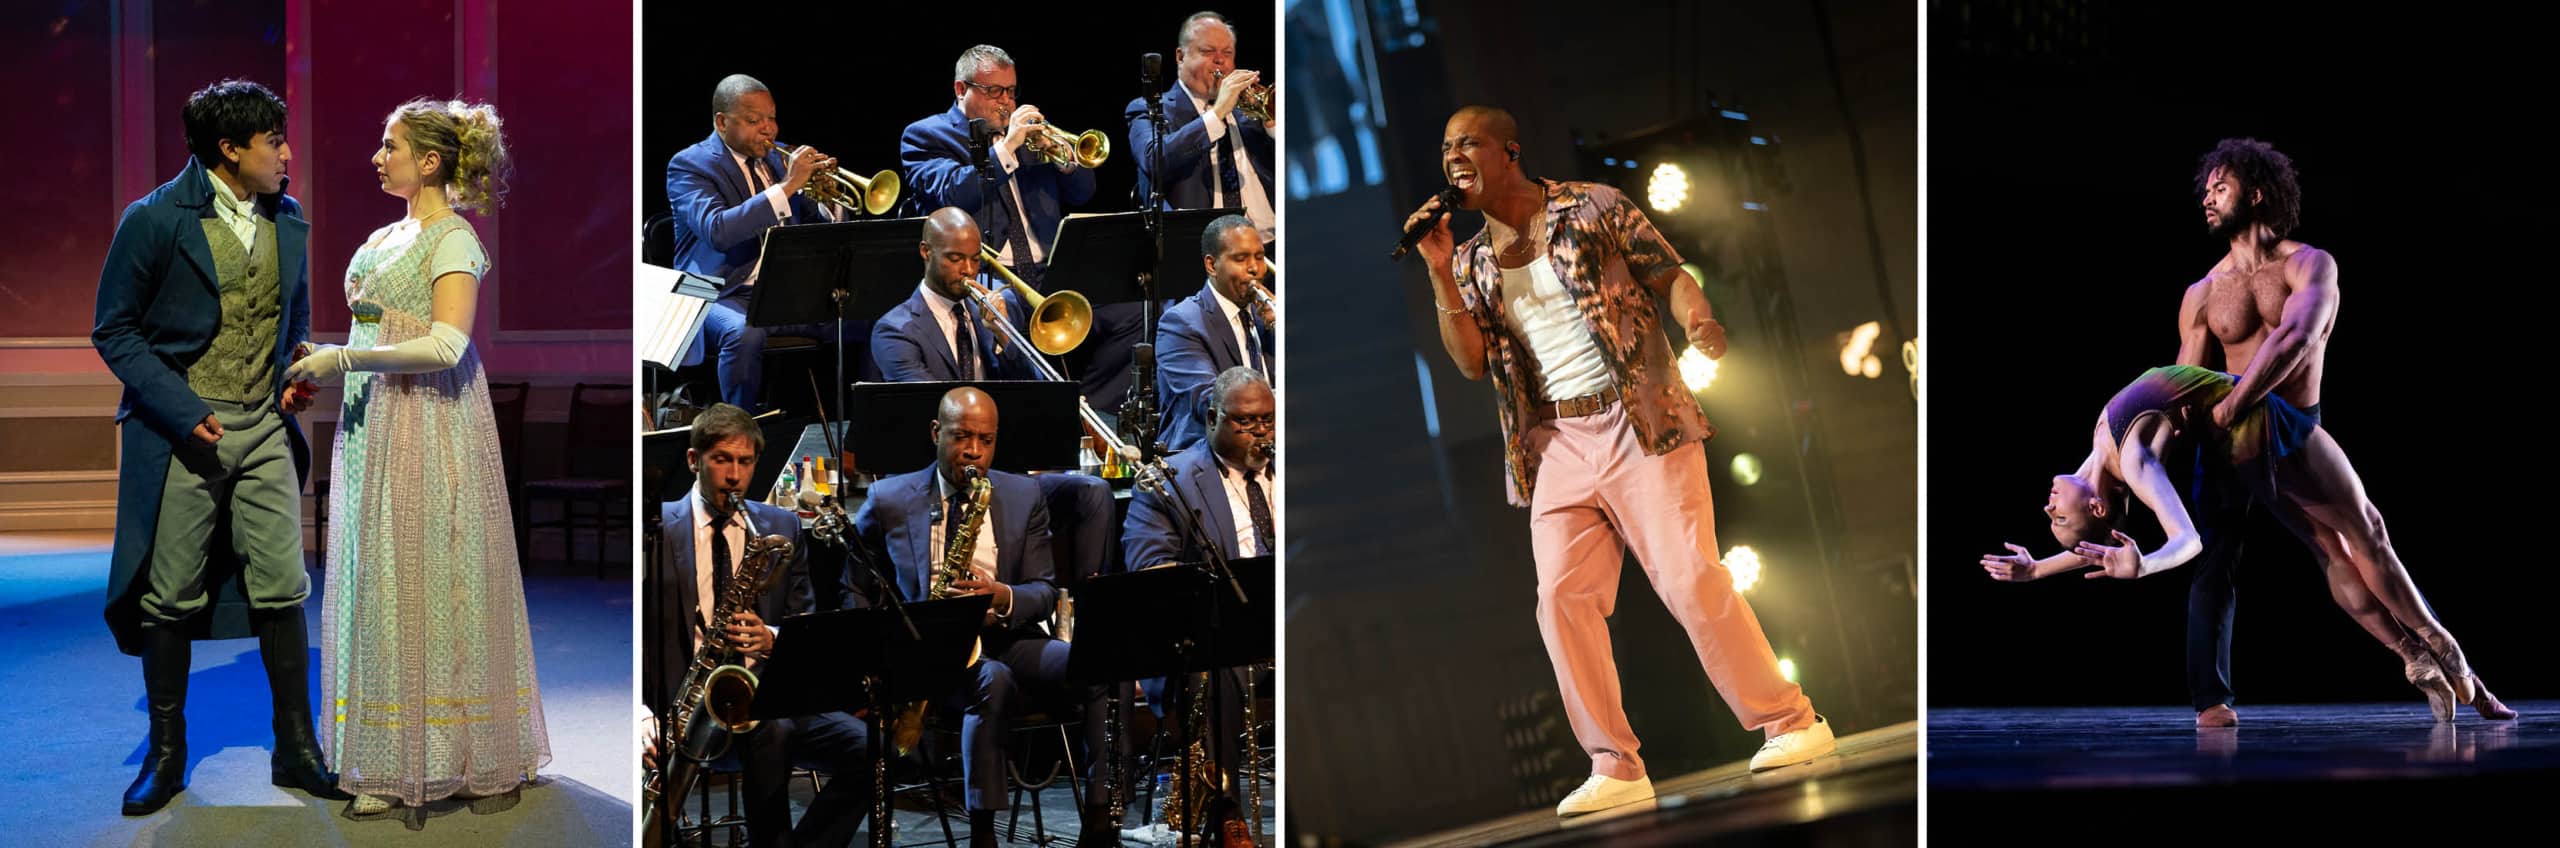 Actors from the Chautauqua Theater Company performing in Pride and Prejudice, Wynton Marsalis performing with the Jazz at Lincoln Center Orchestra, a member of Straight No Chaser singing and alumni dancers performing on the Amphitheater stage.